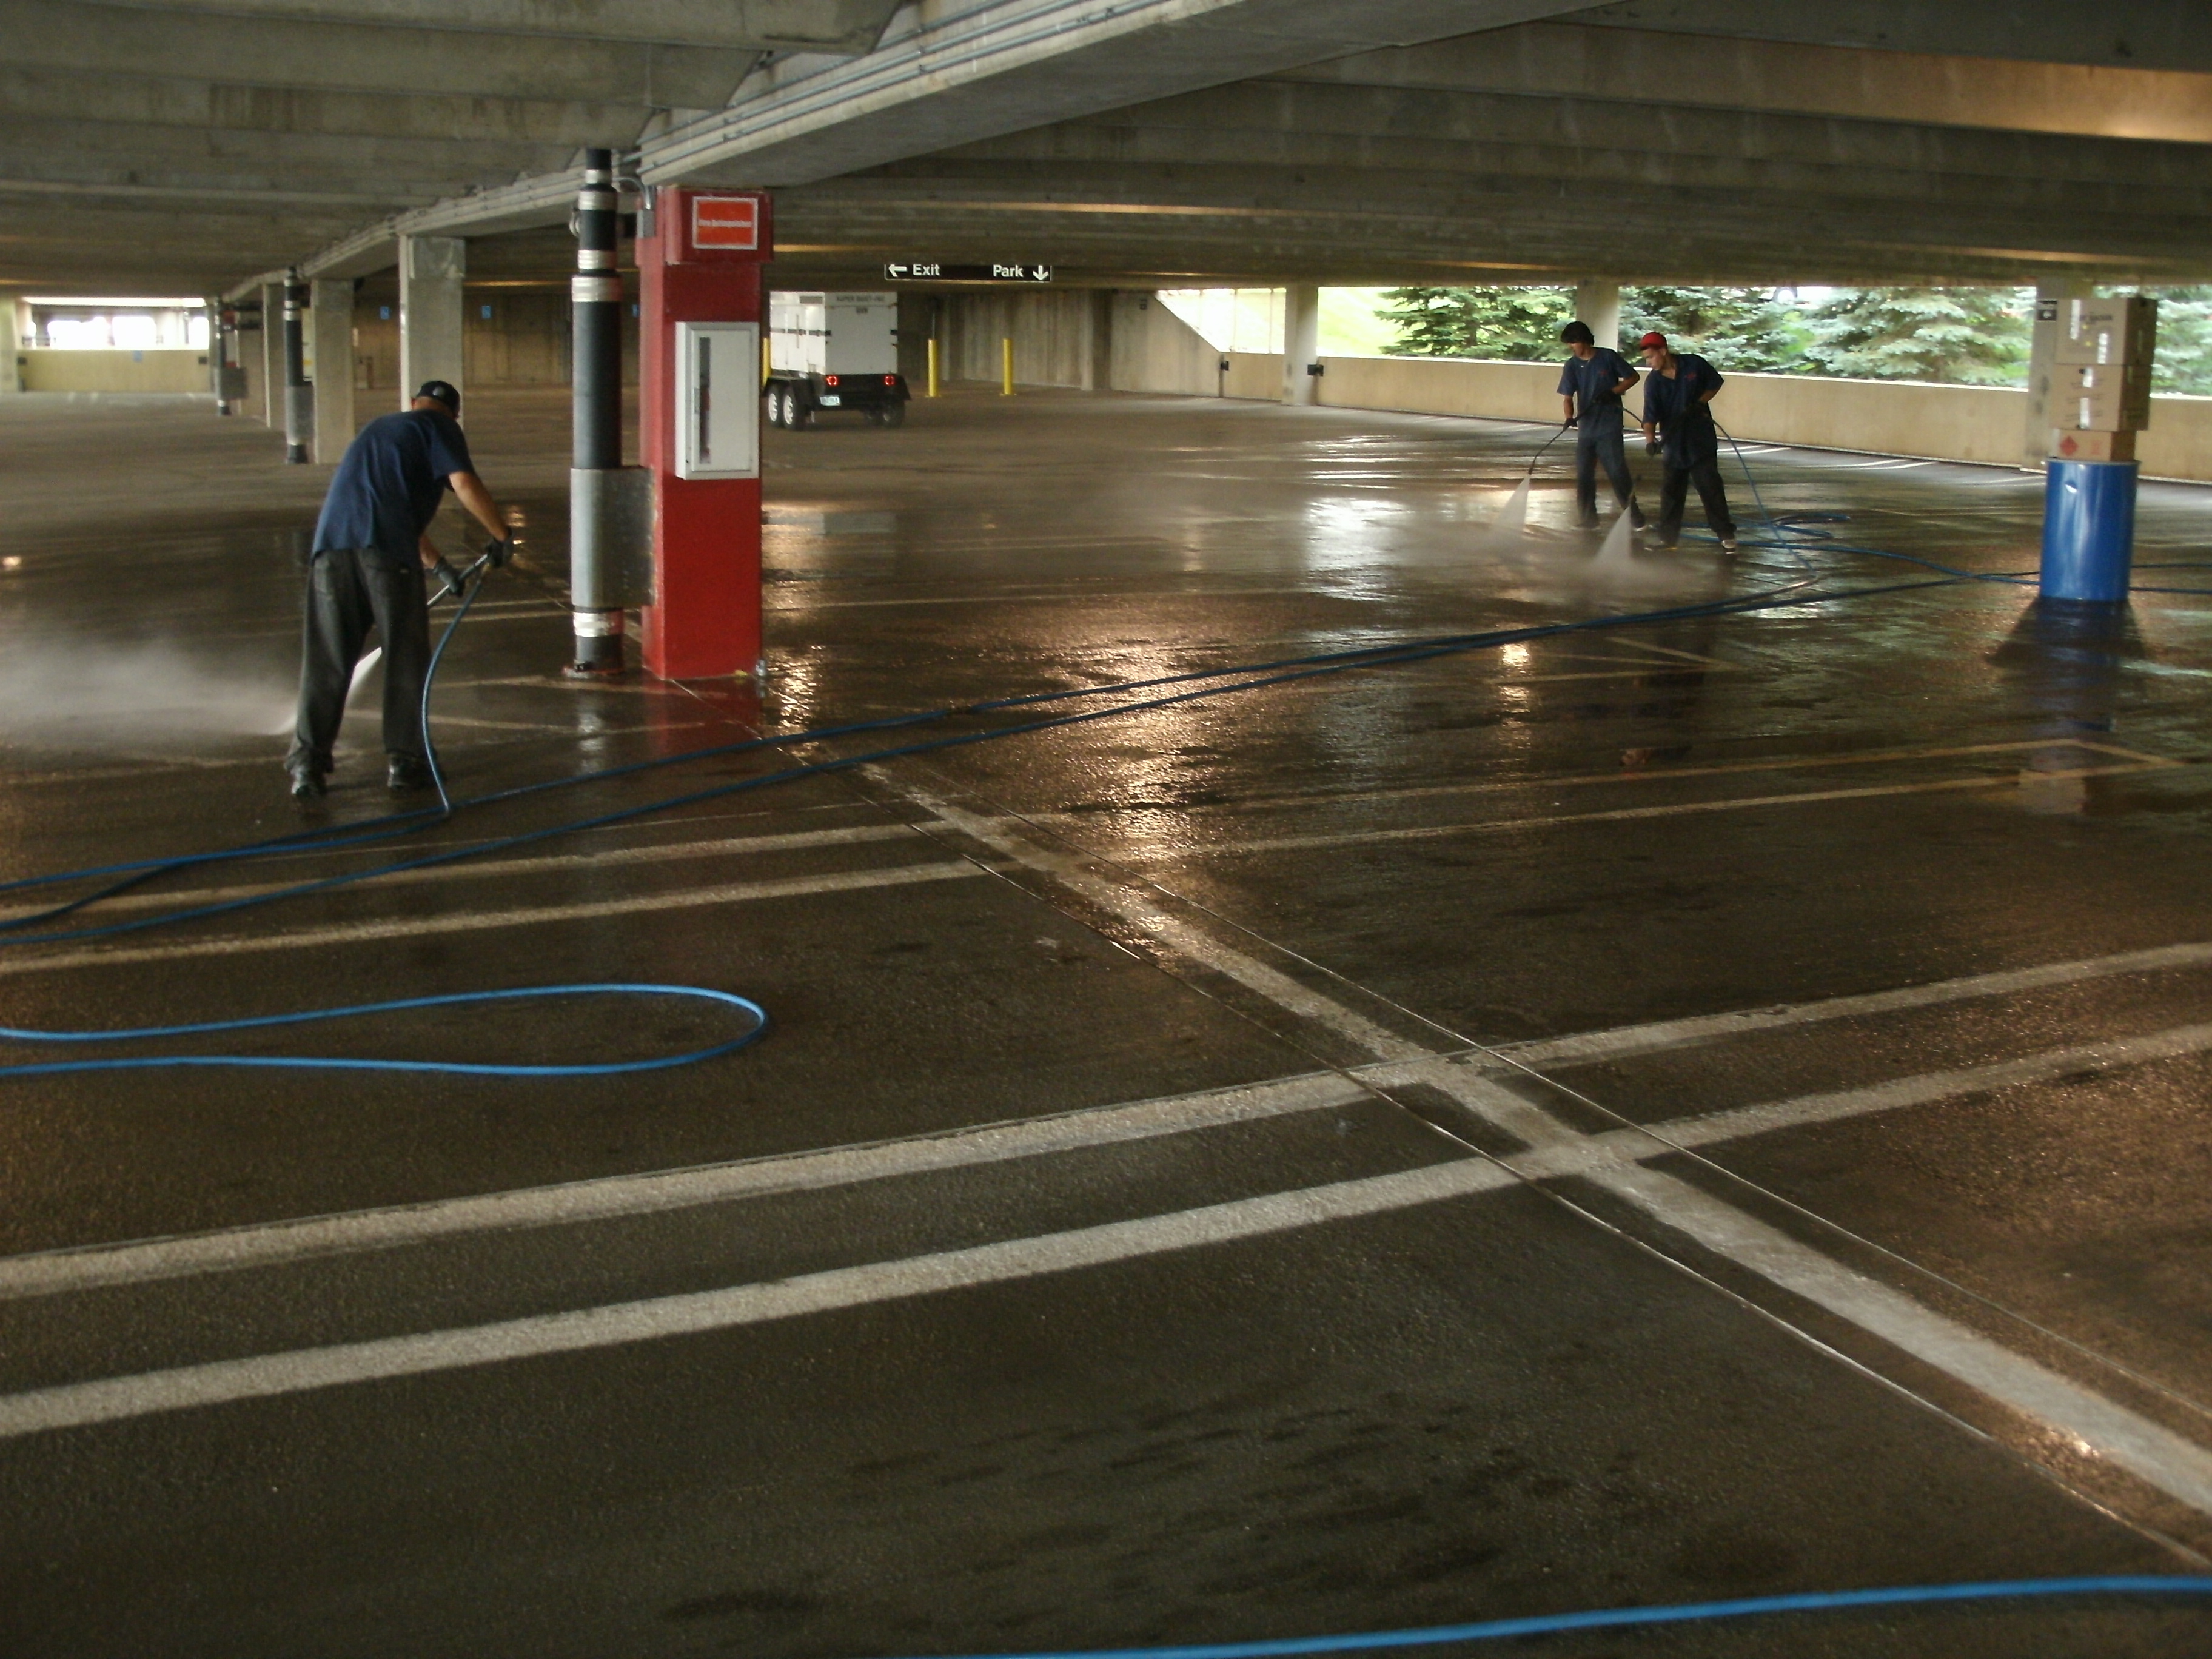 Parking Garage Cleaning Using A Fire Hose New Video Added